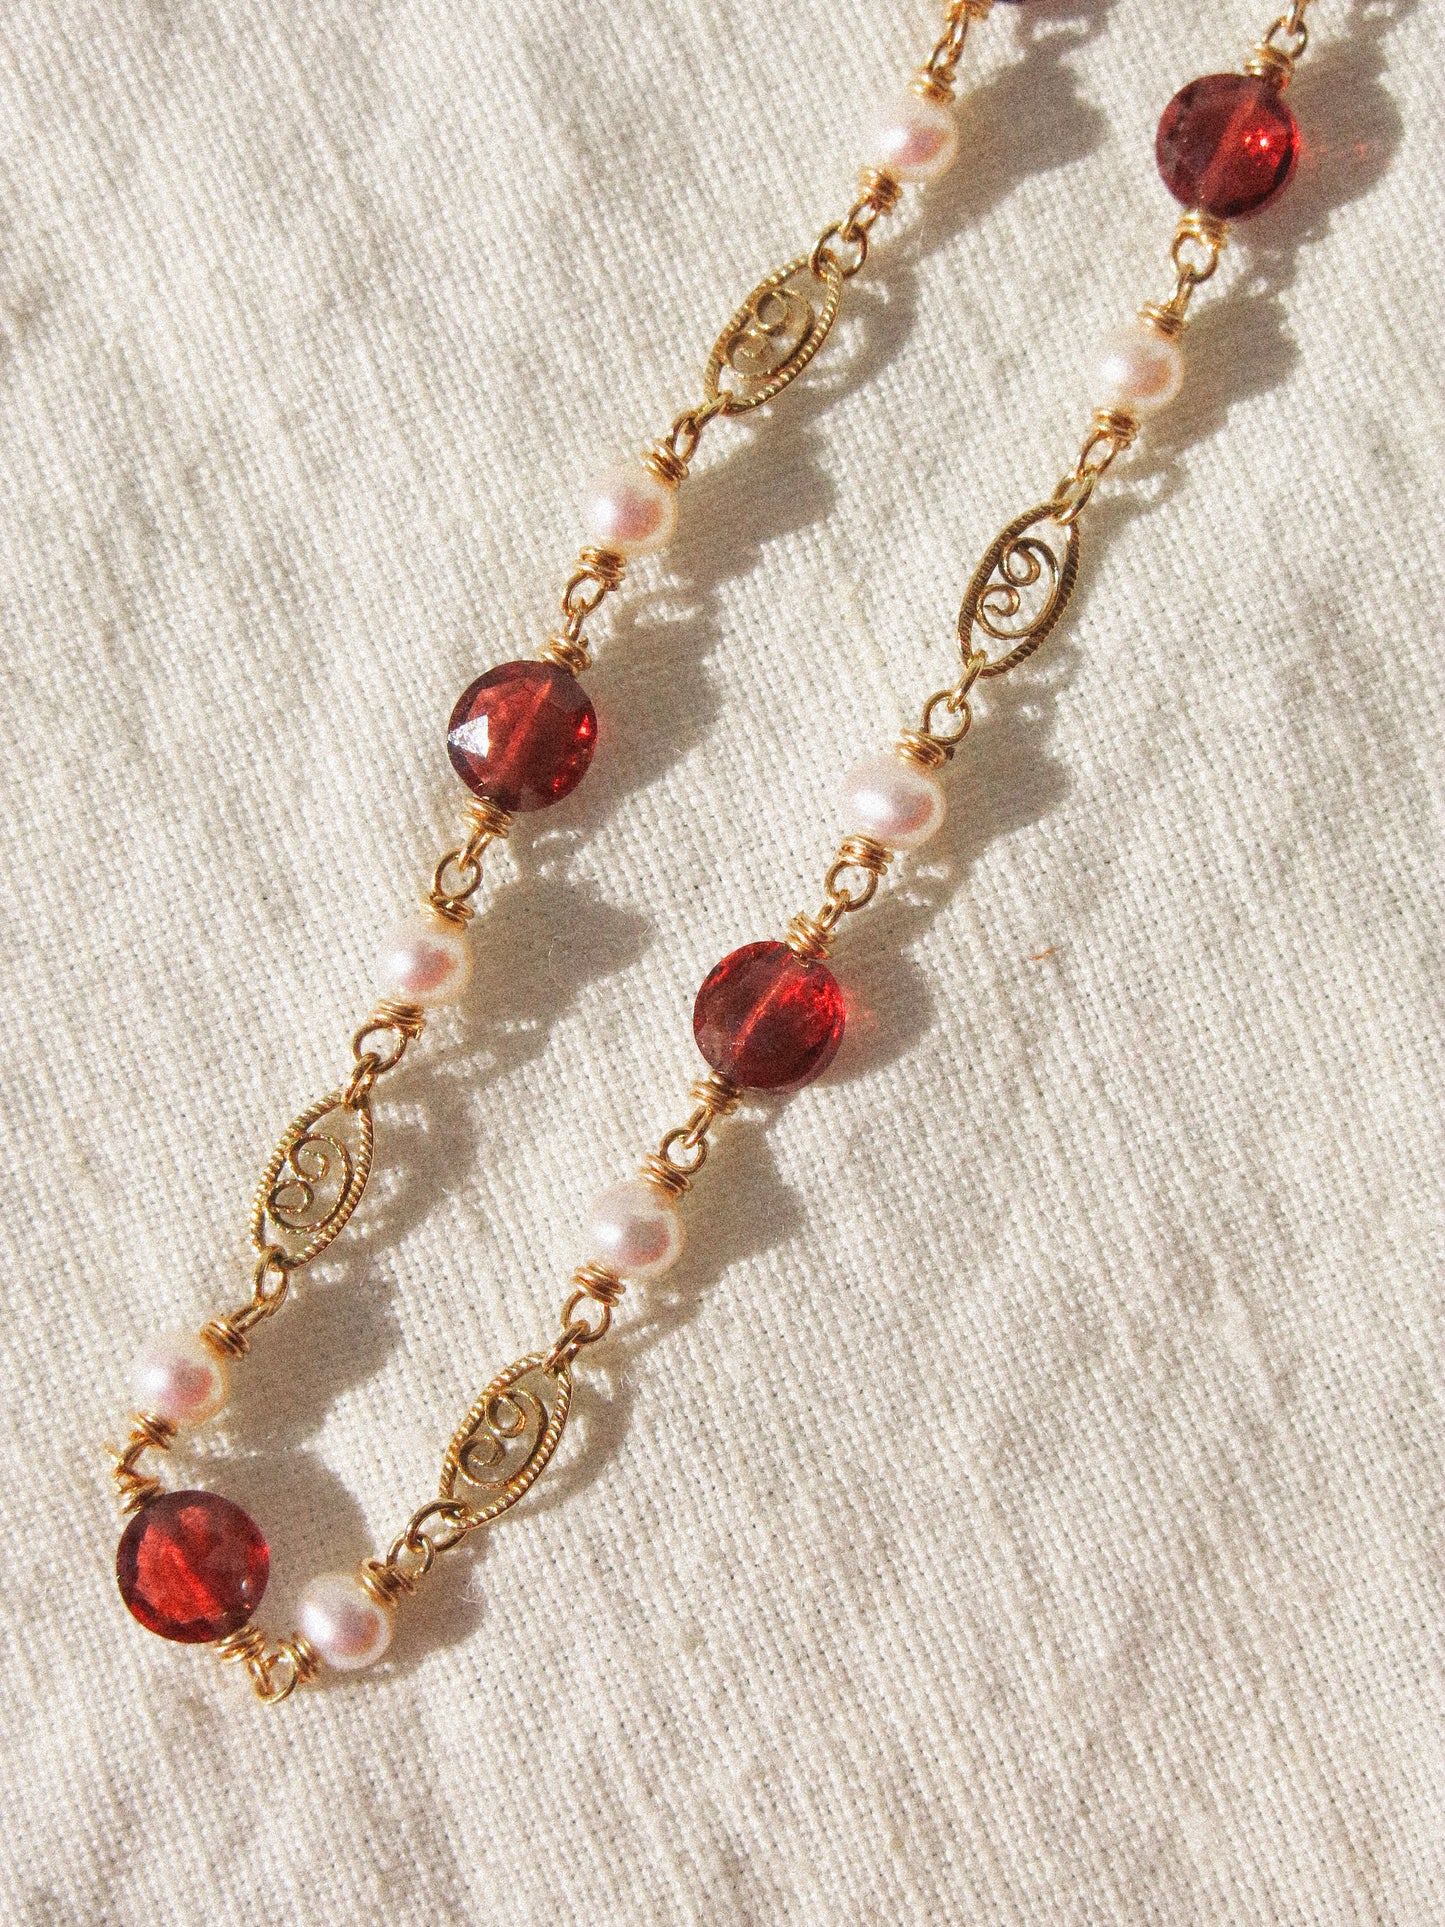 Mozambique Garnet and White Round Pearl Short Necklace with Figuree Links